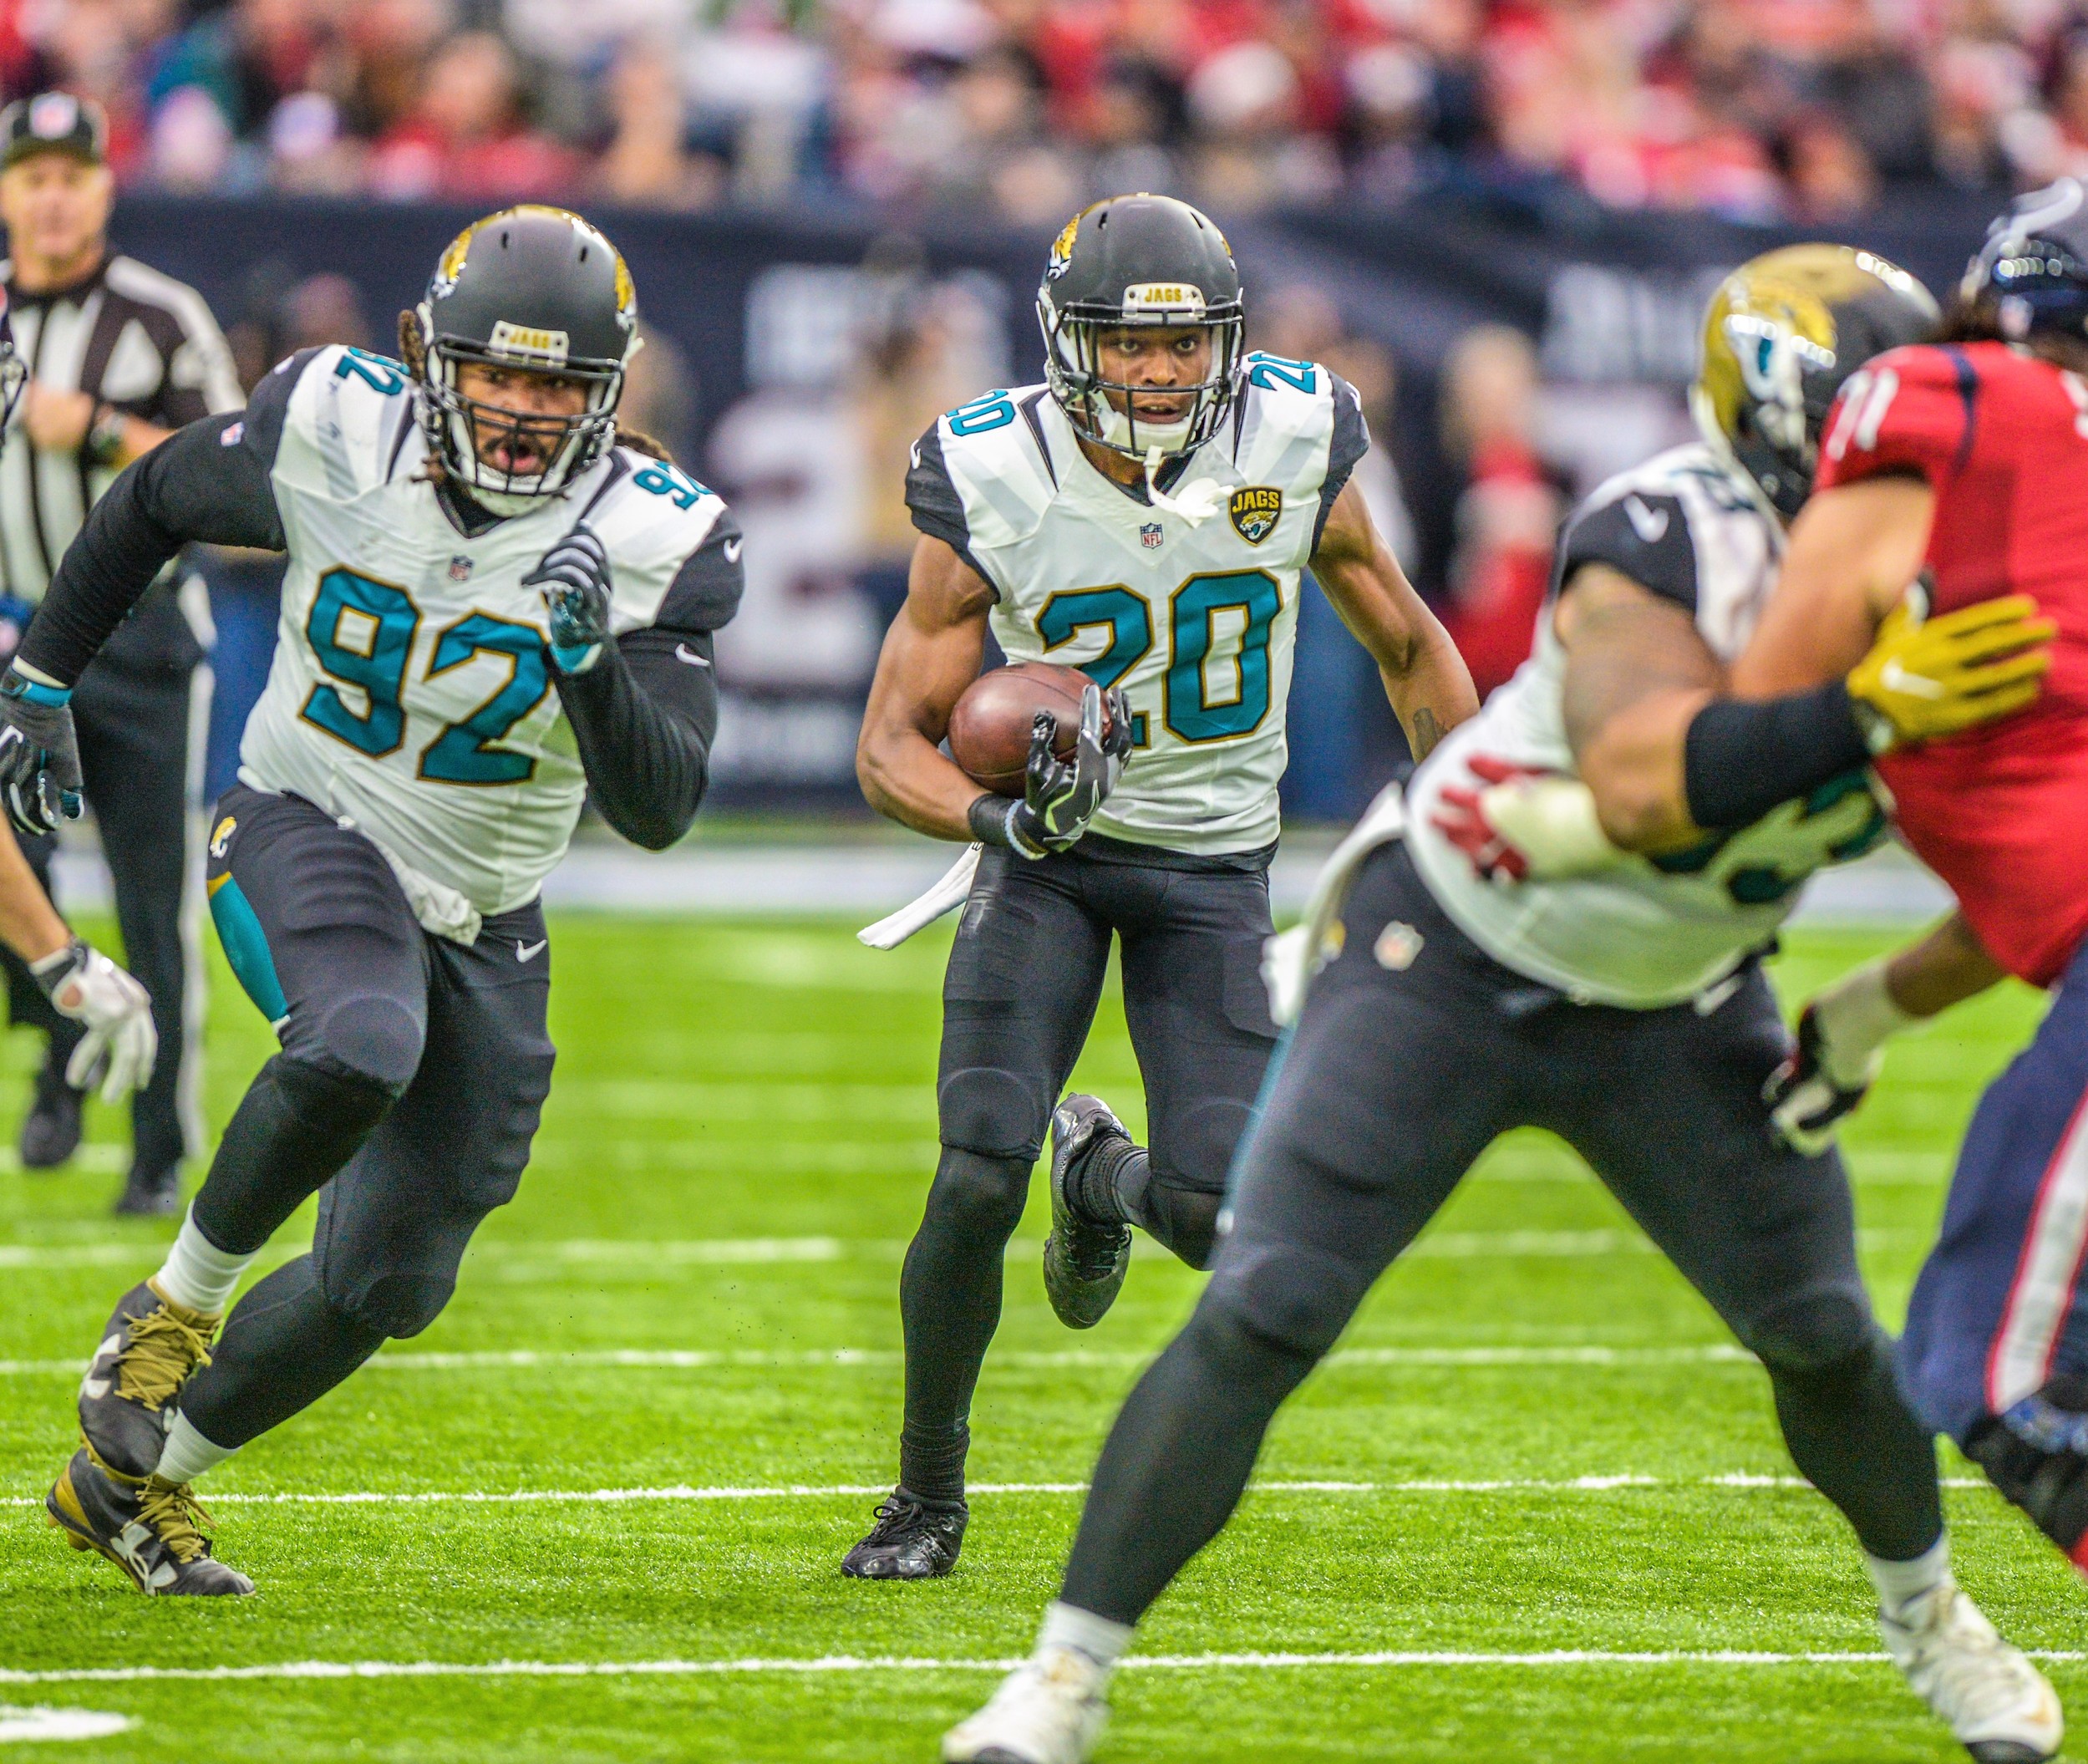 Former FSU star Jalen Ramsey (20) got his first career interception as a pro early in the second quarter of Jacksonville’s game against Houston and returned it 35 yards. Photo by Rick Wilson/Jacksonville Jaguars